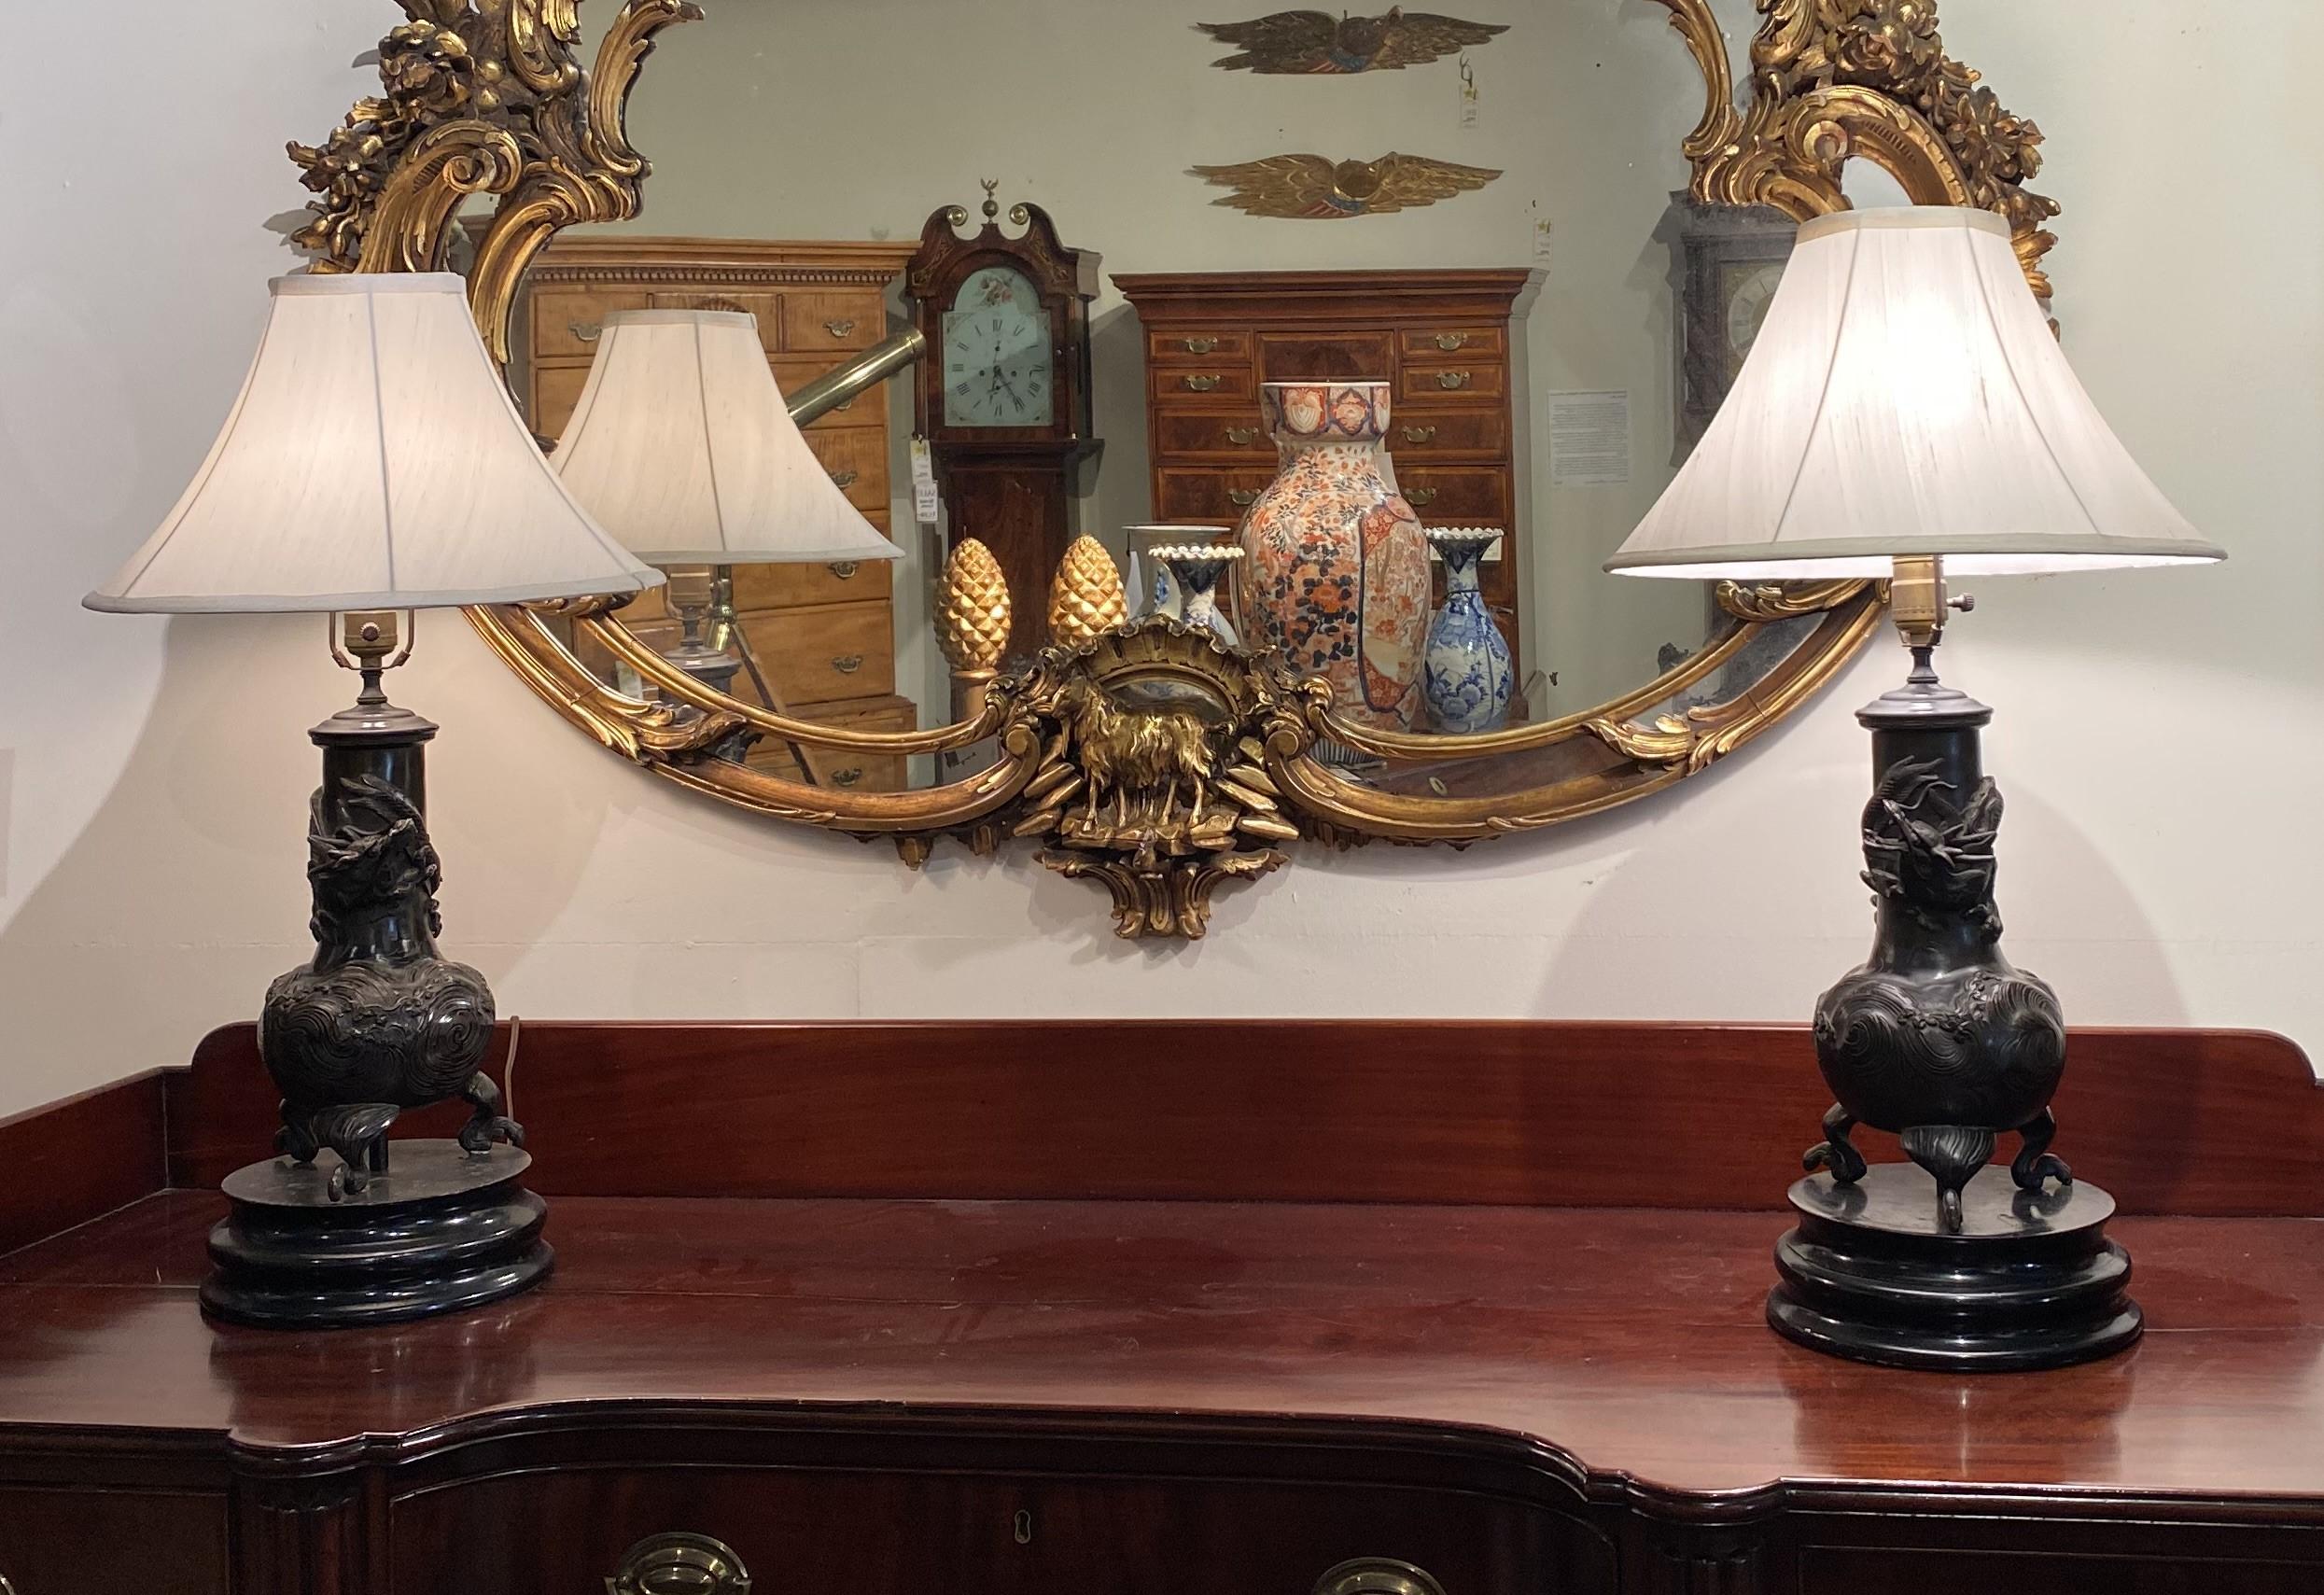 A fine pair of patinated bronze table lamps with dragon motif, on carved wooden felted bases and white flared shades, in very good working condition, with some minor surface scuffs, and light wear commensurate with age and use. The lamps are